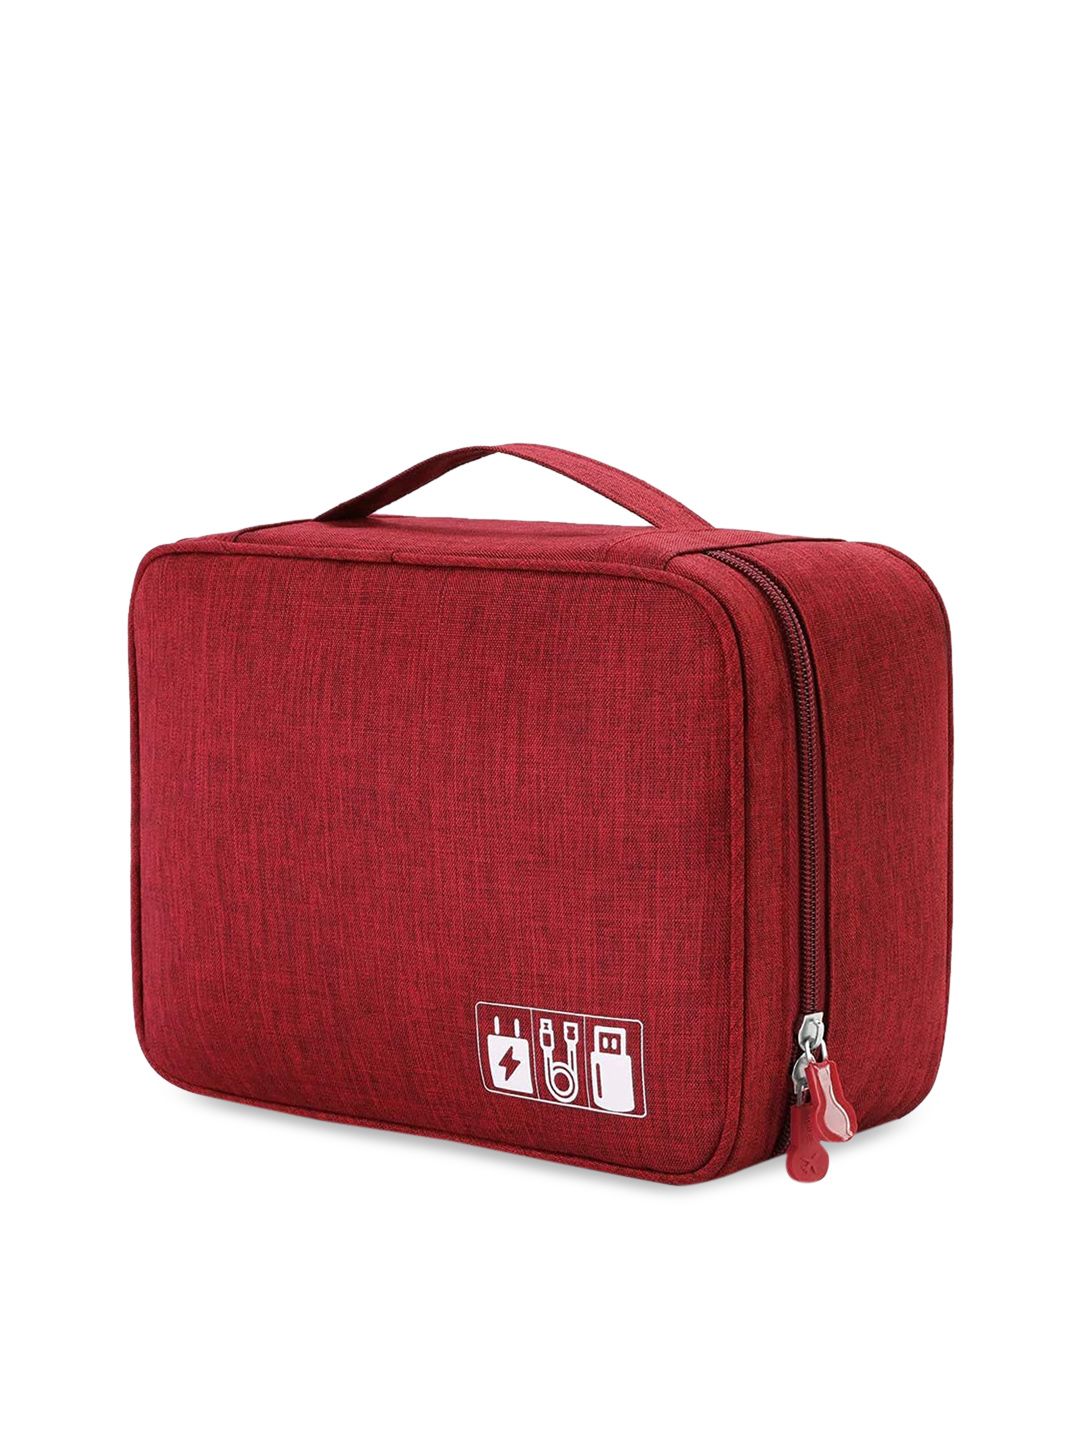 HOUSE OF QUIRK Red Self-Design Multi-Utility Organisers Price in India